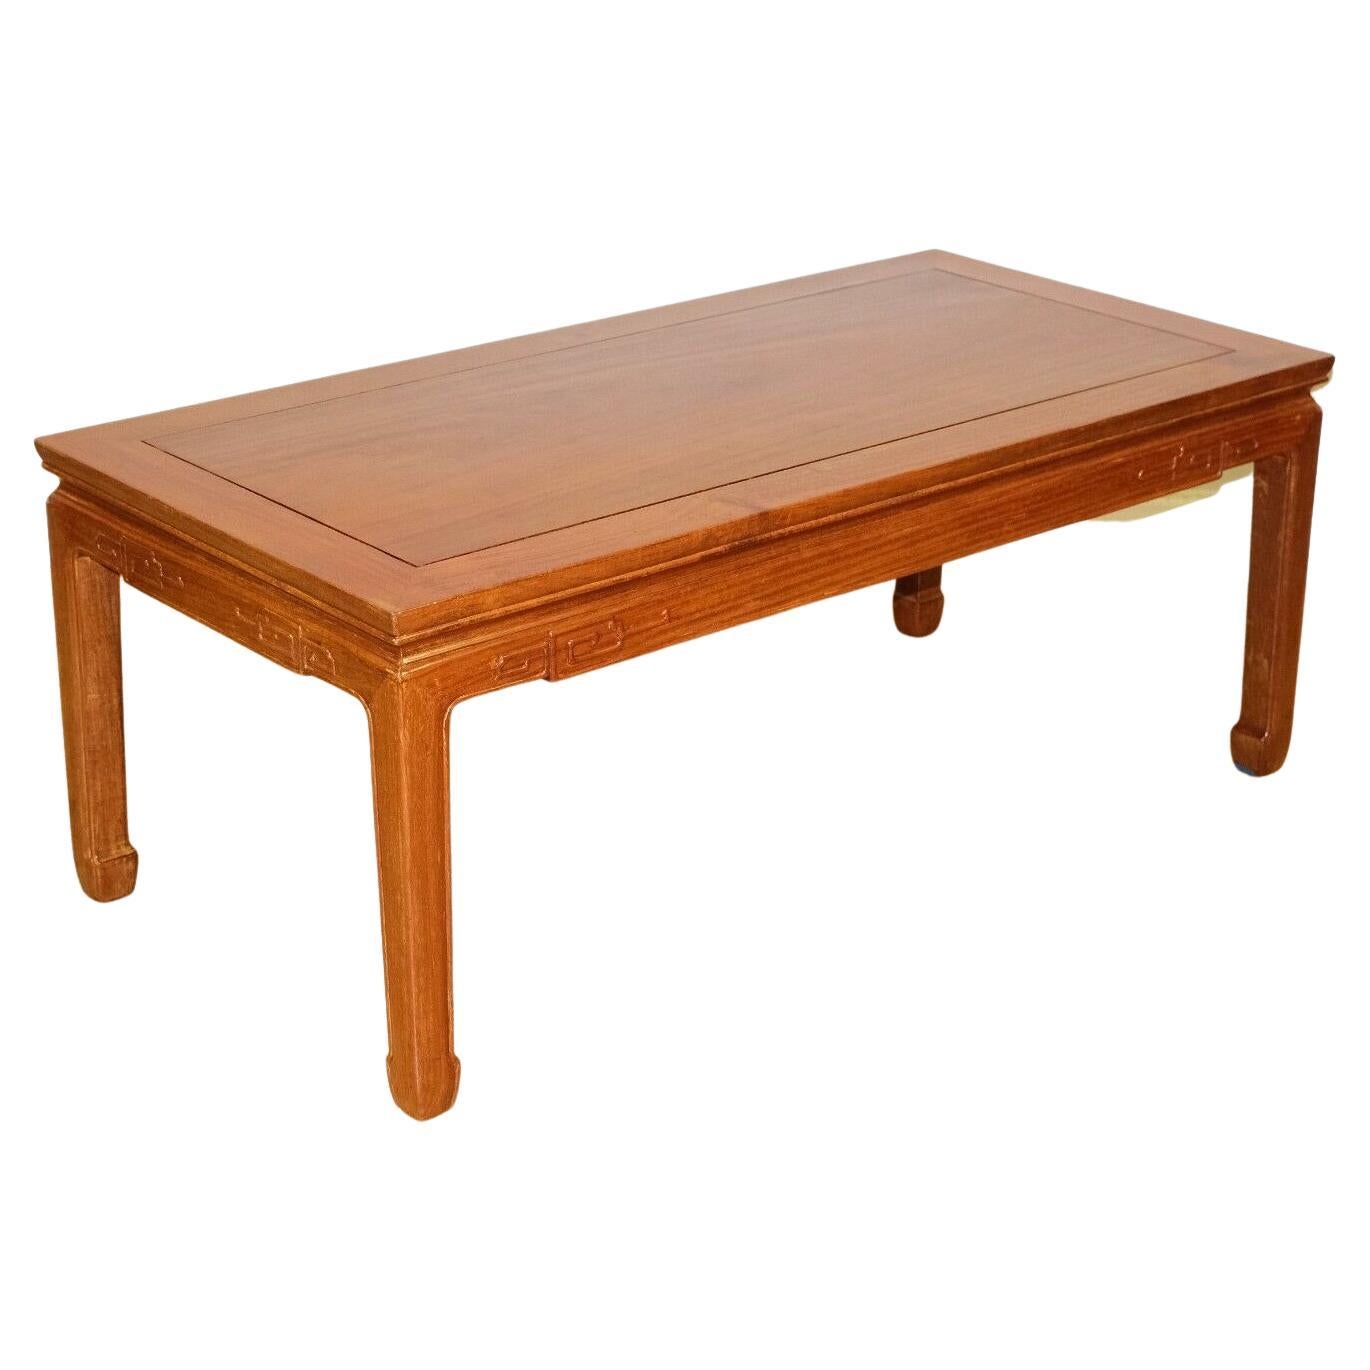 LOVELY VINTAGE SOLID HARDWOOD CHiNESE COFFEE TABLE ON HOOF FEET For Sale